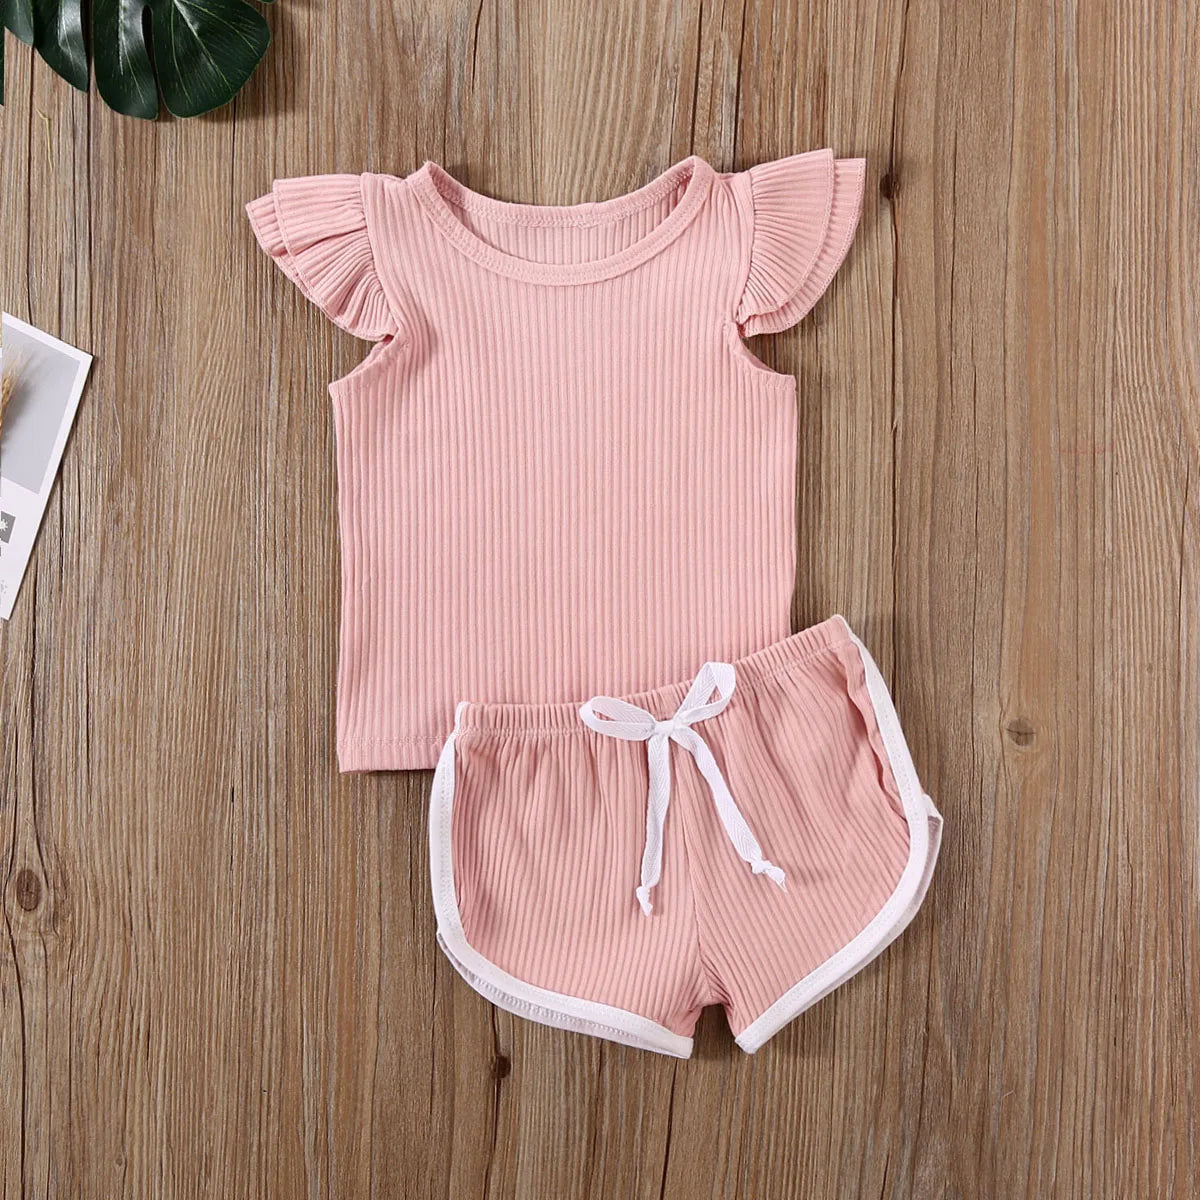 2020 Summer Infant Baby Girls Boys Clothes Sets Ruffles Short Sleeve Pullover T Shirts Shorts Solid Outfits